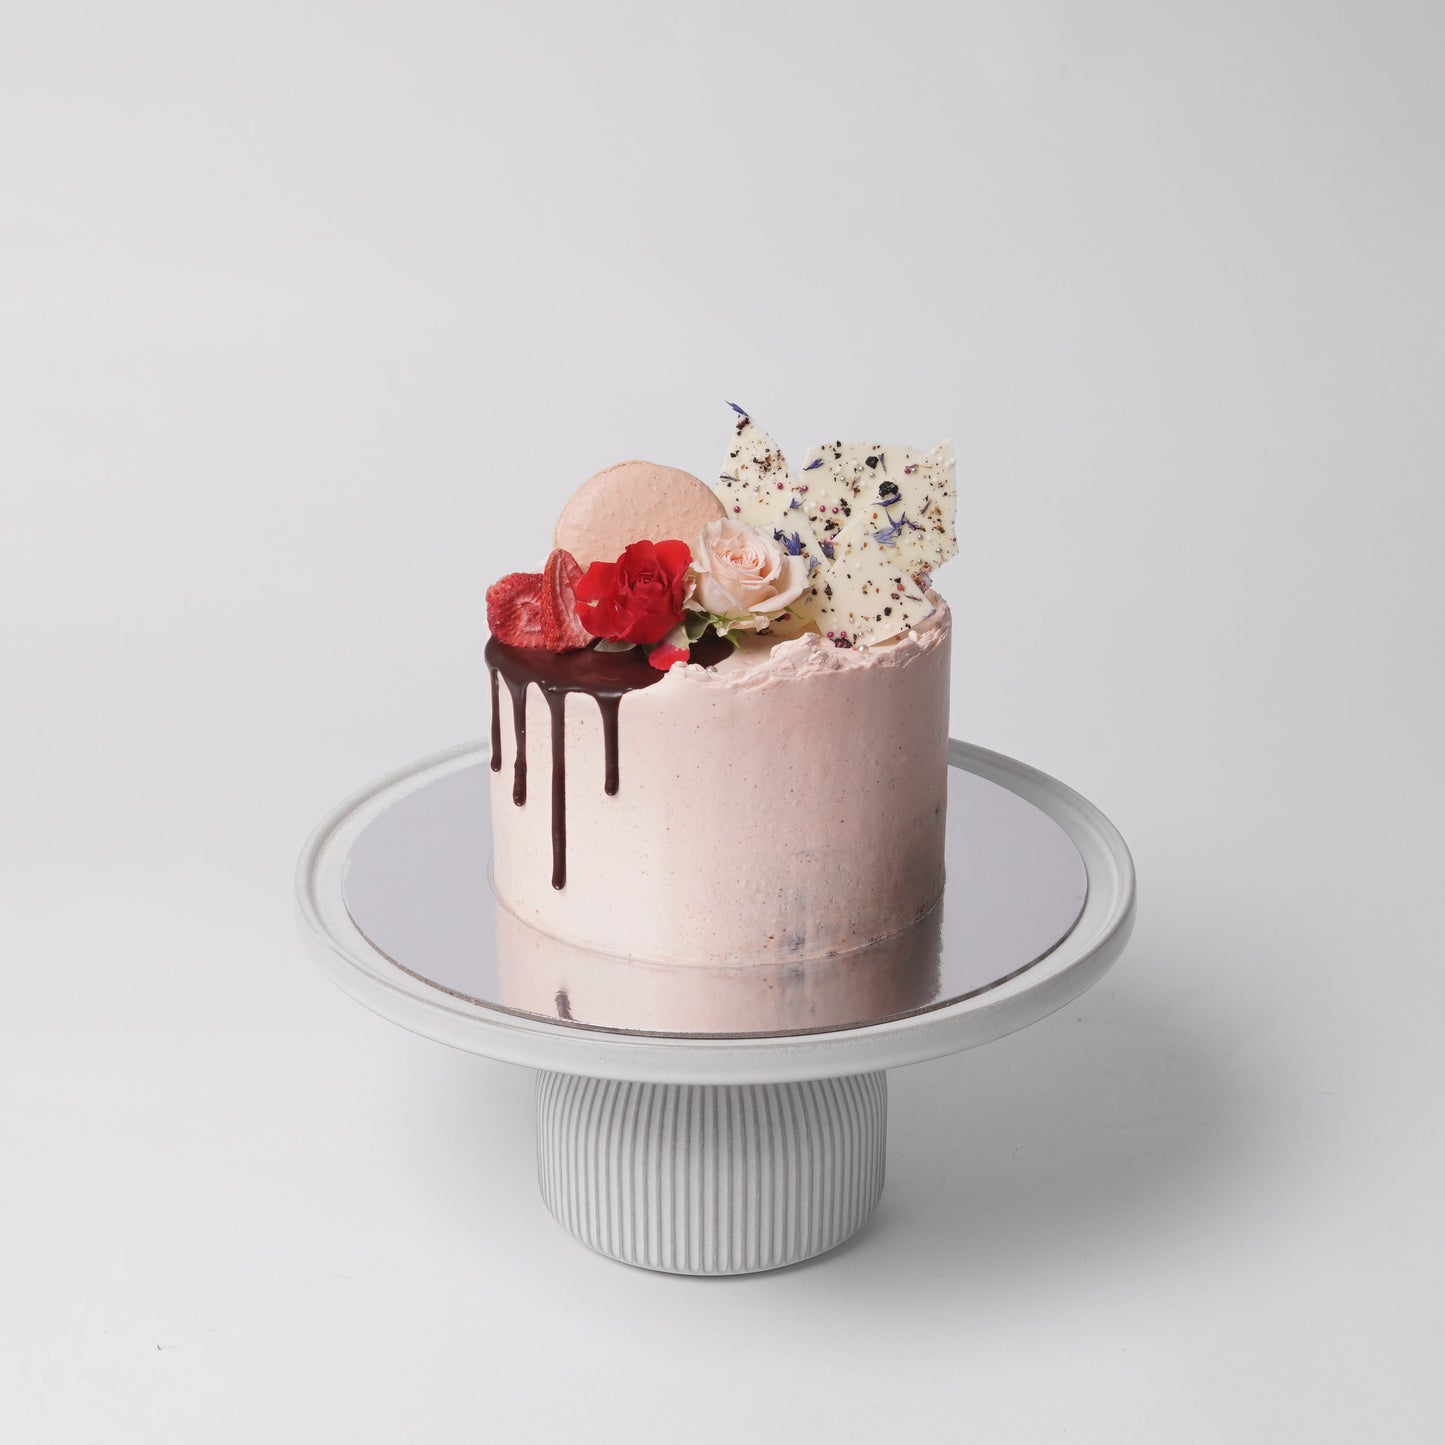 FOR HER #8 - CHOCOLATE & STRAWBERRY CAKE